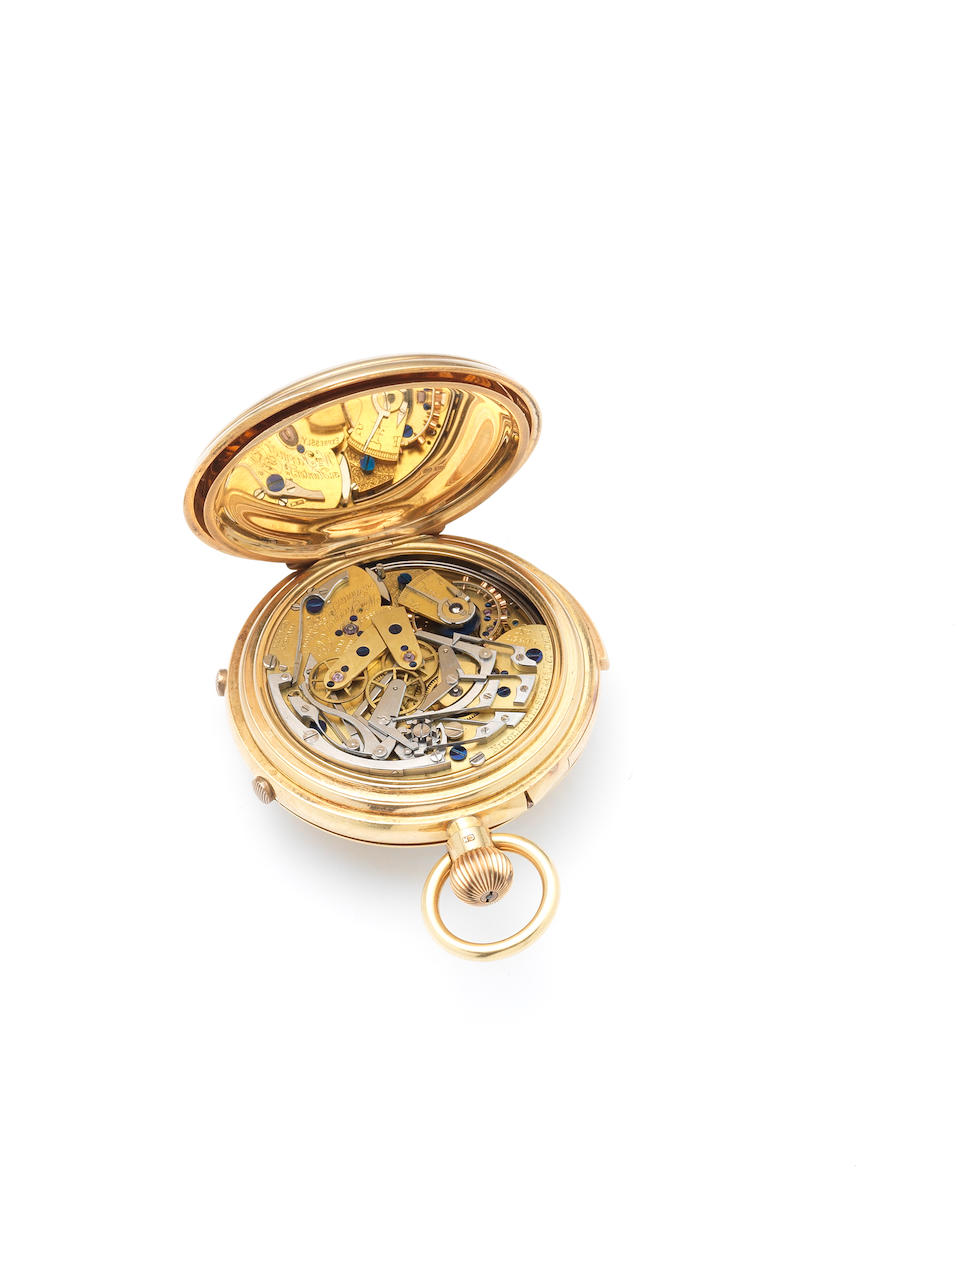 Bonhams : Nicole Nielson & Co. A very fine and very rare 18ct gold ...